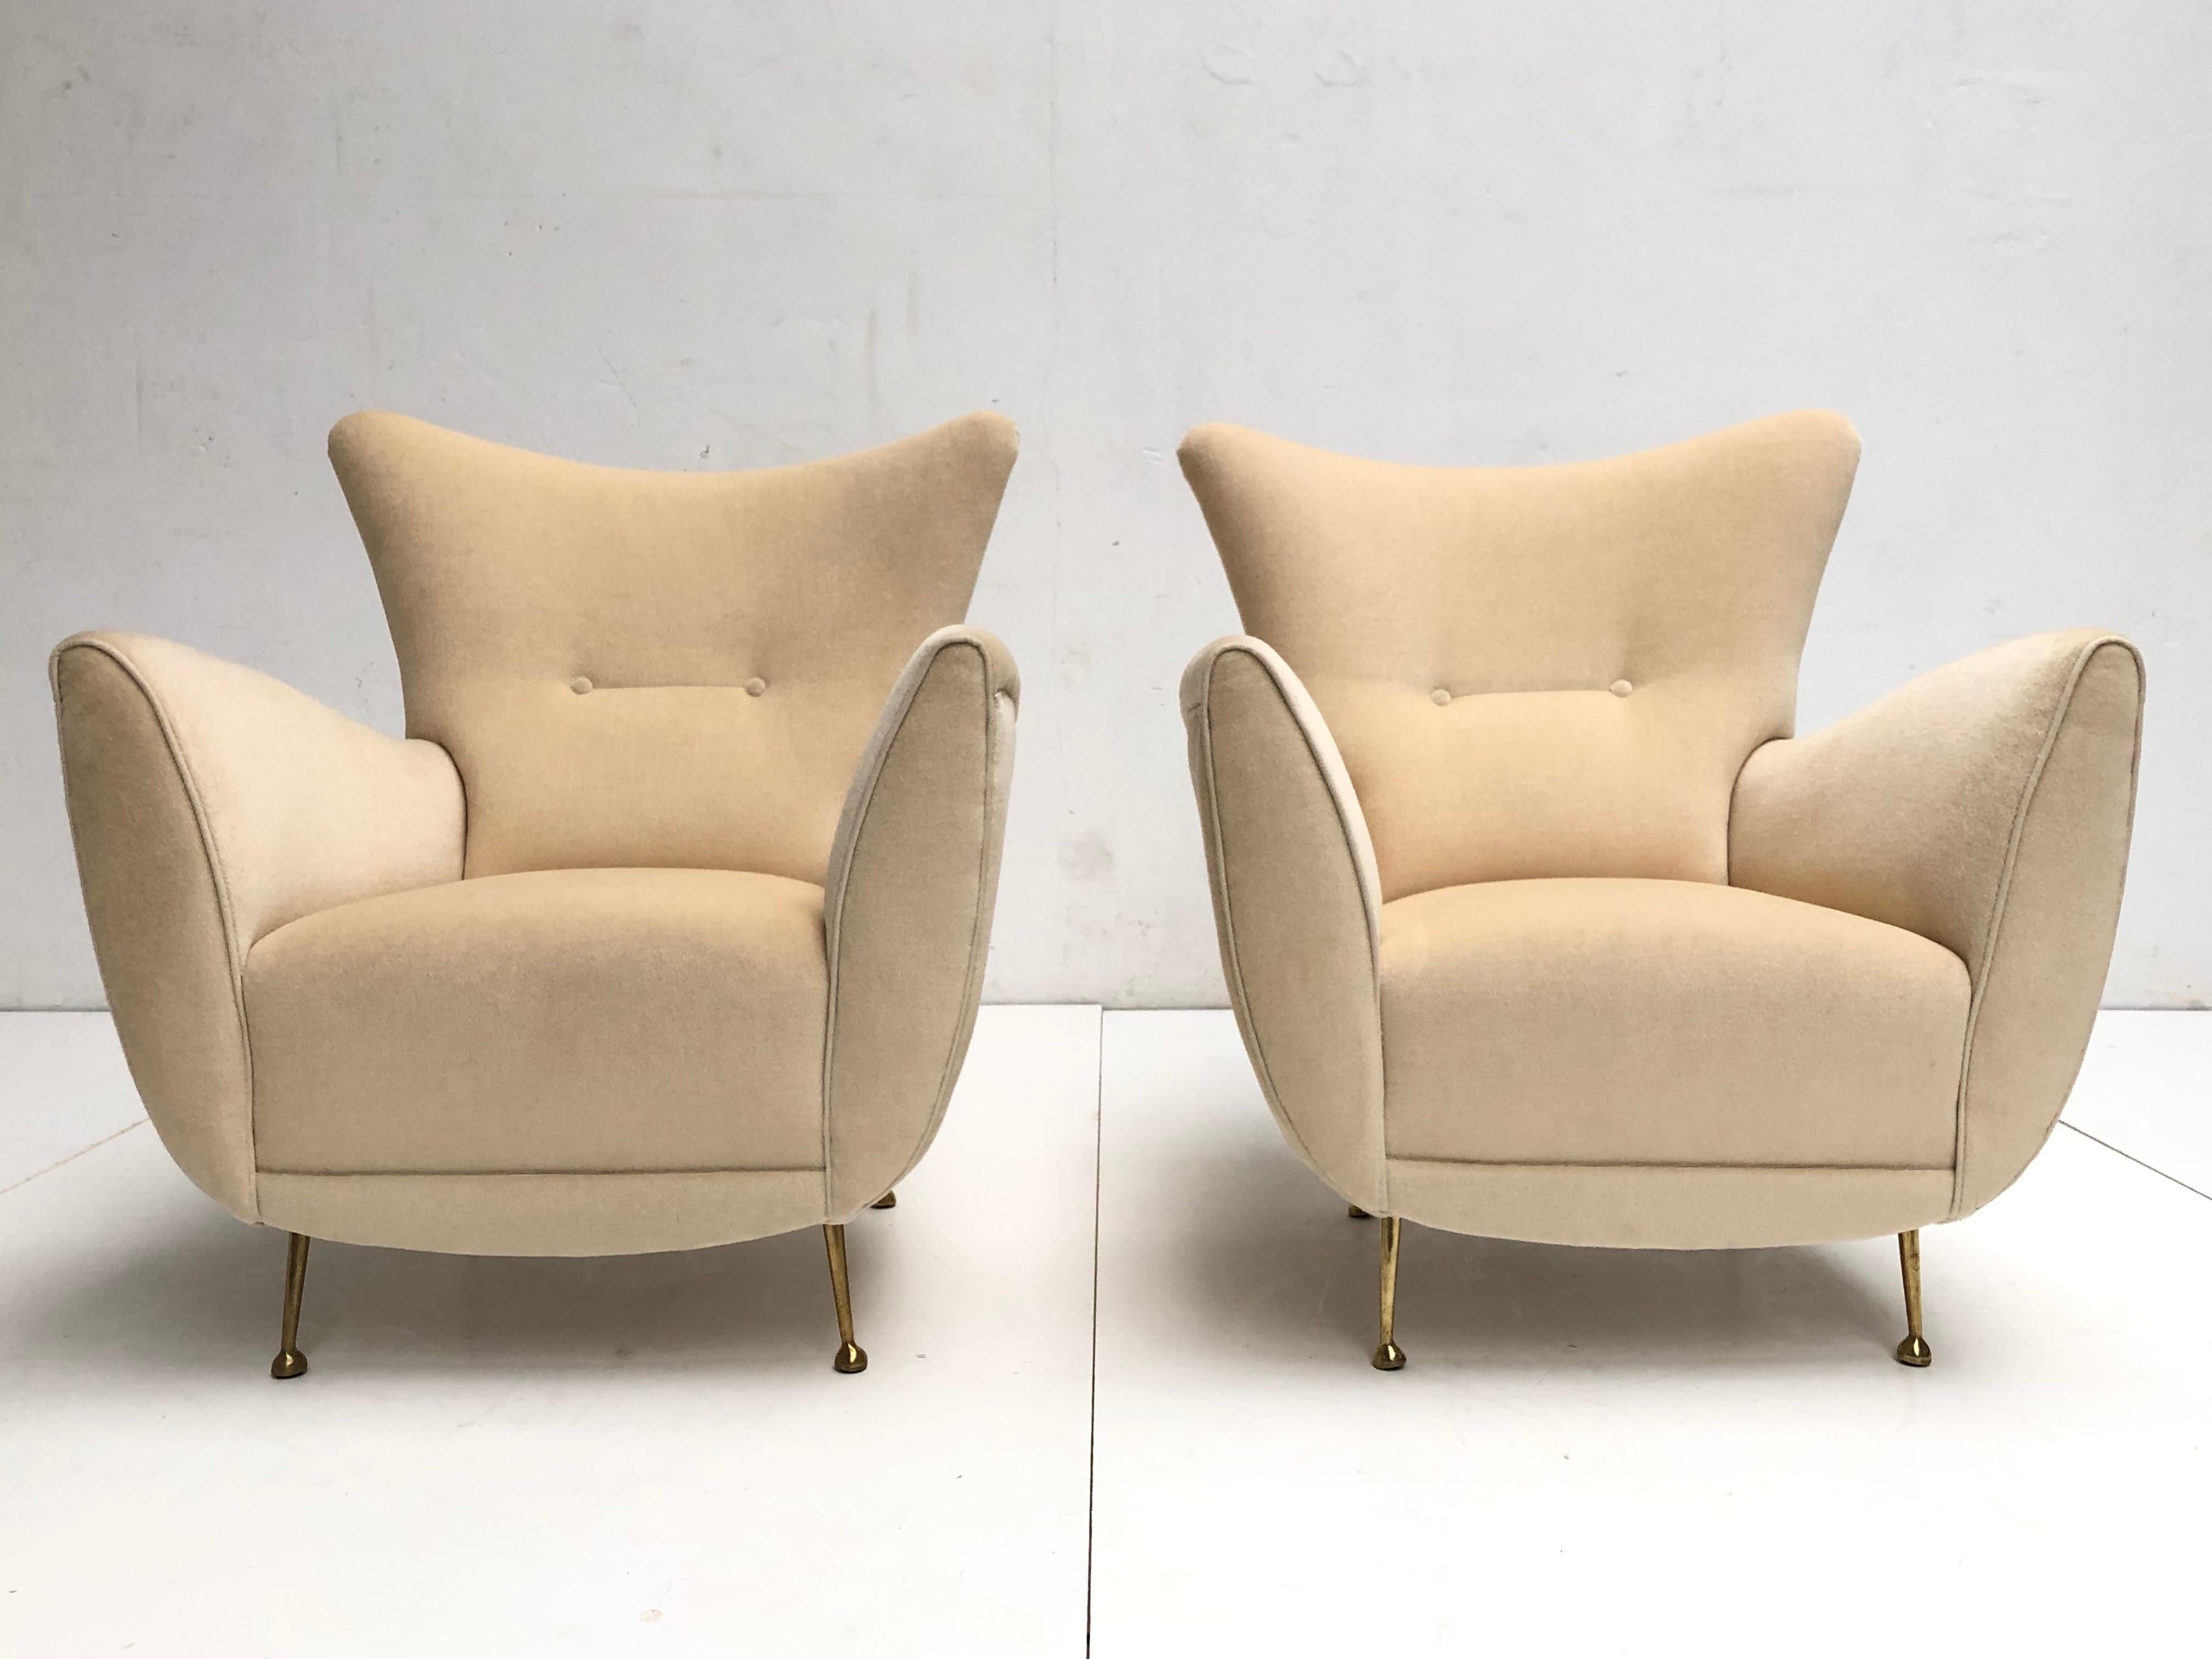 Beautiful pair of restored sculptural form Italian lounge chairs in the style of Gio Ponti dating from the very early 1950s with beautifully hand crafted wood frames and sprung seats, the chairs are finished in mohair fabric with biomorphic form